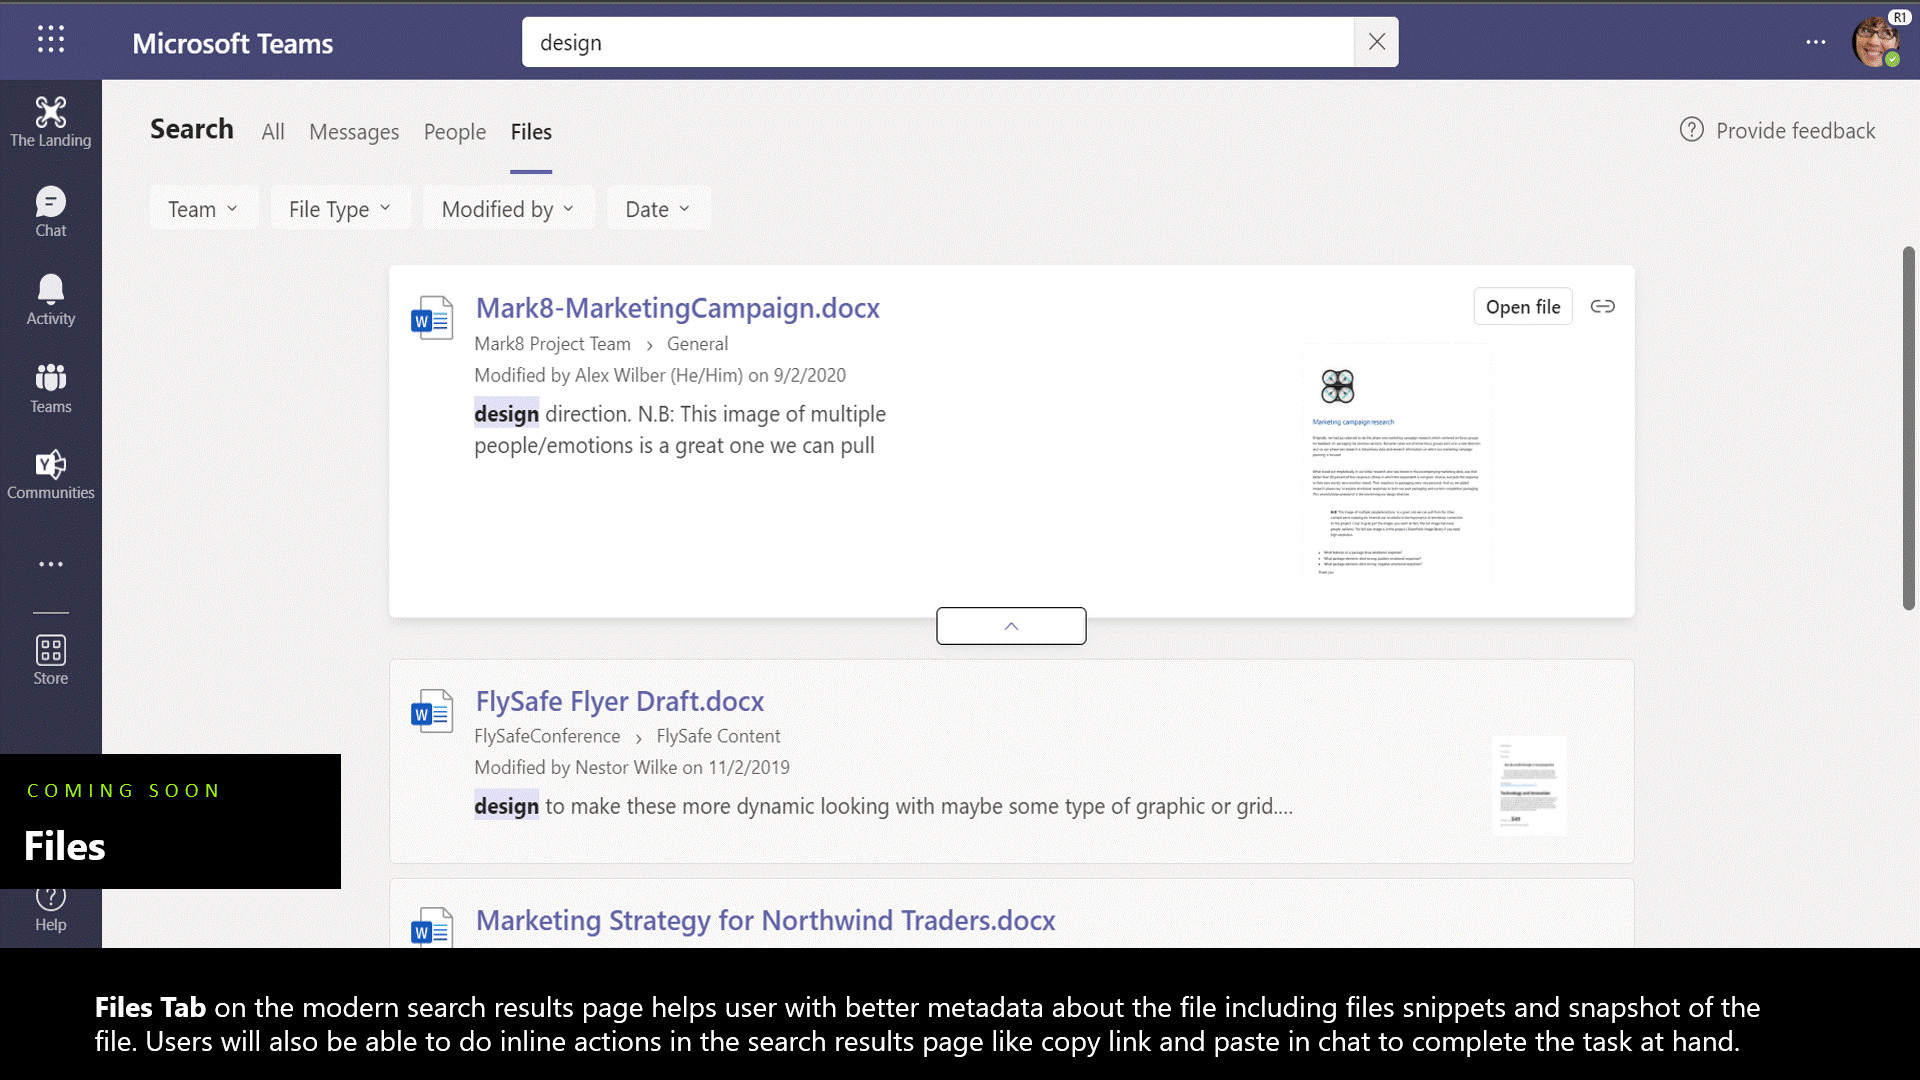 Add description to images in chat in Microsoft Teams